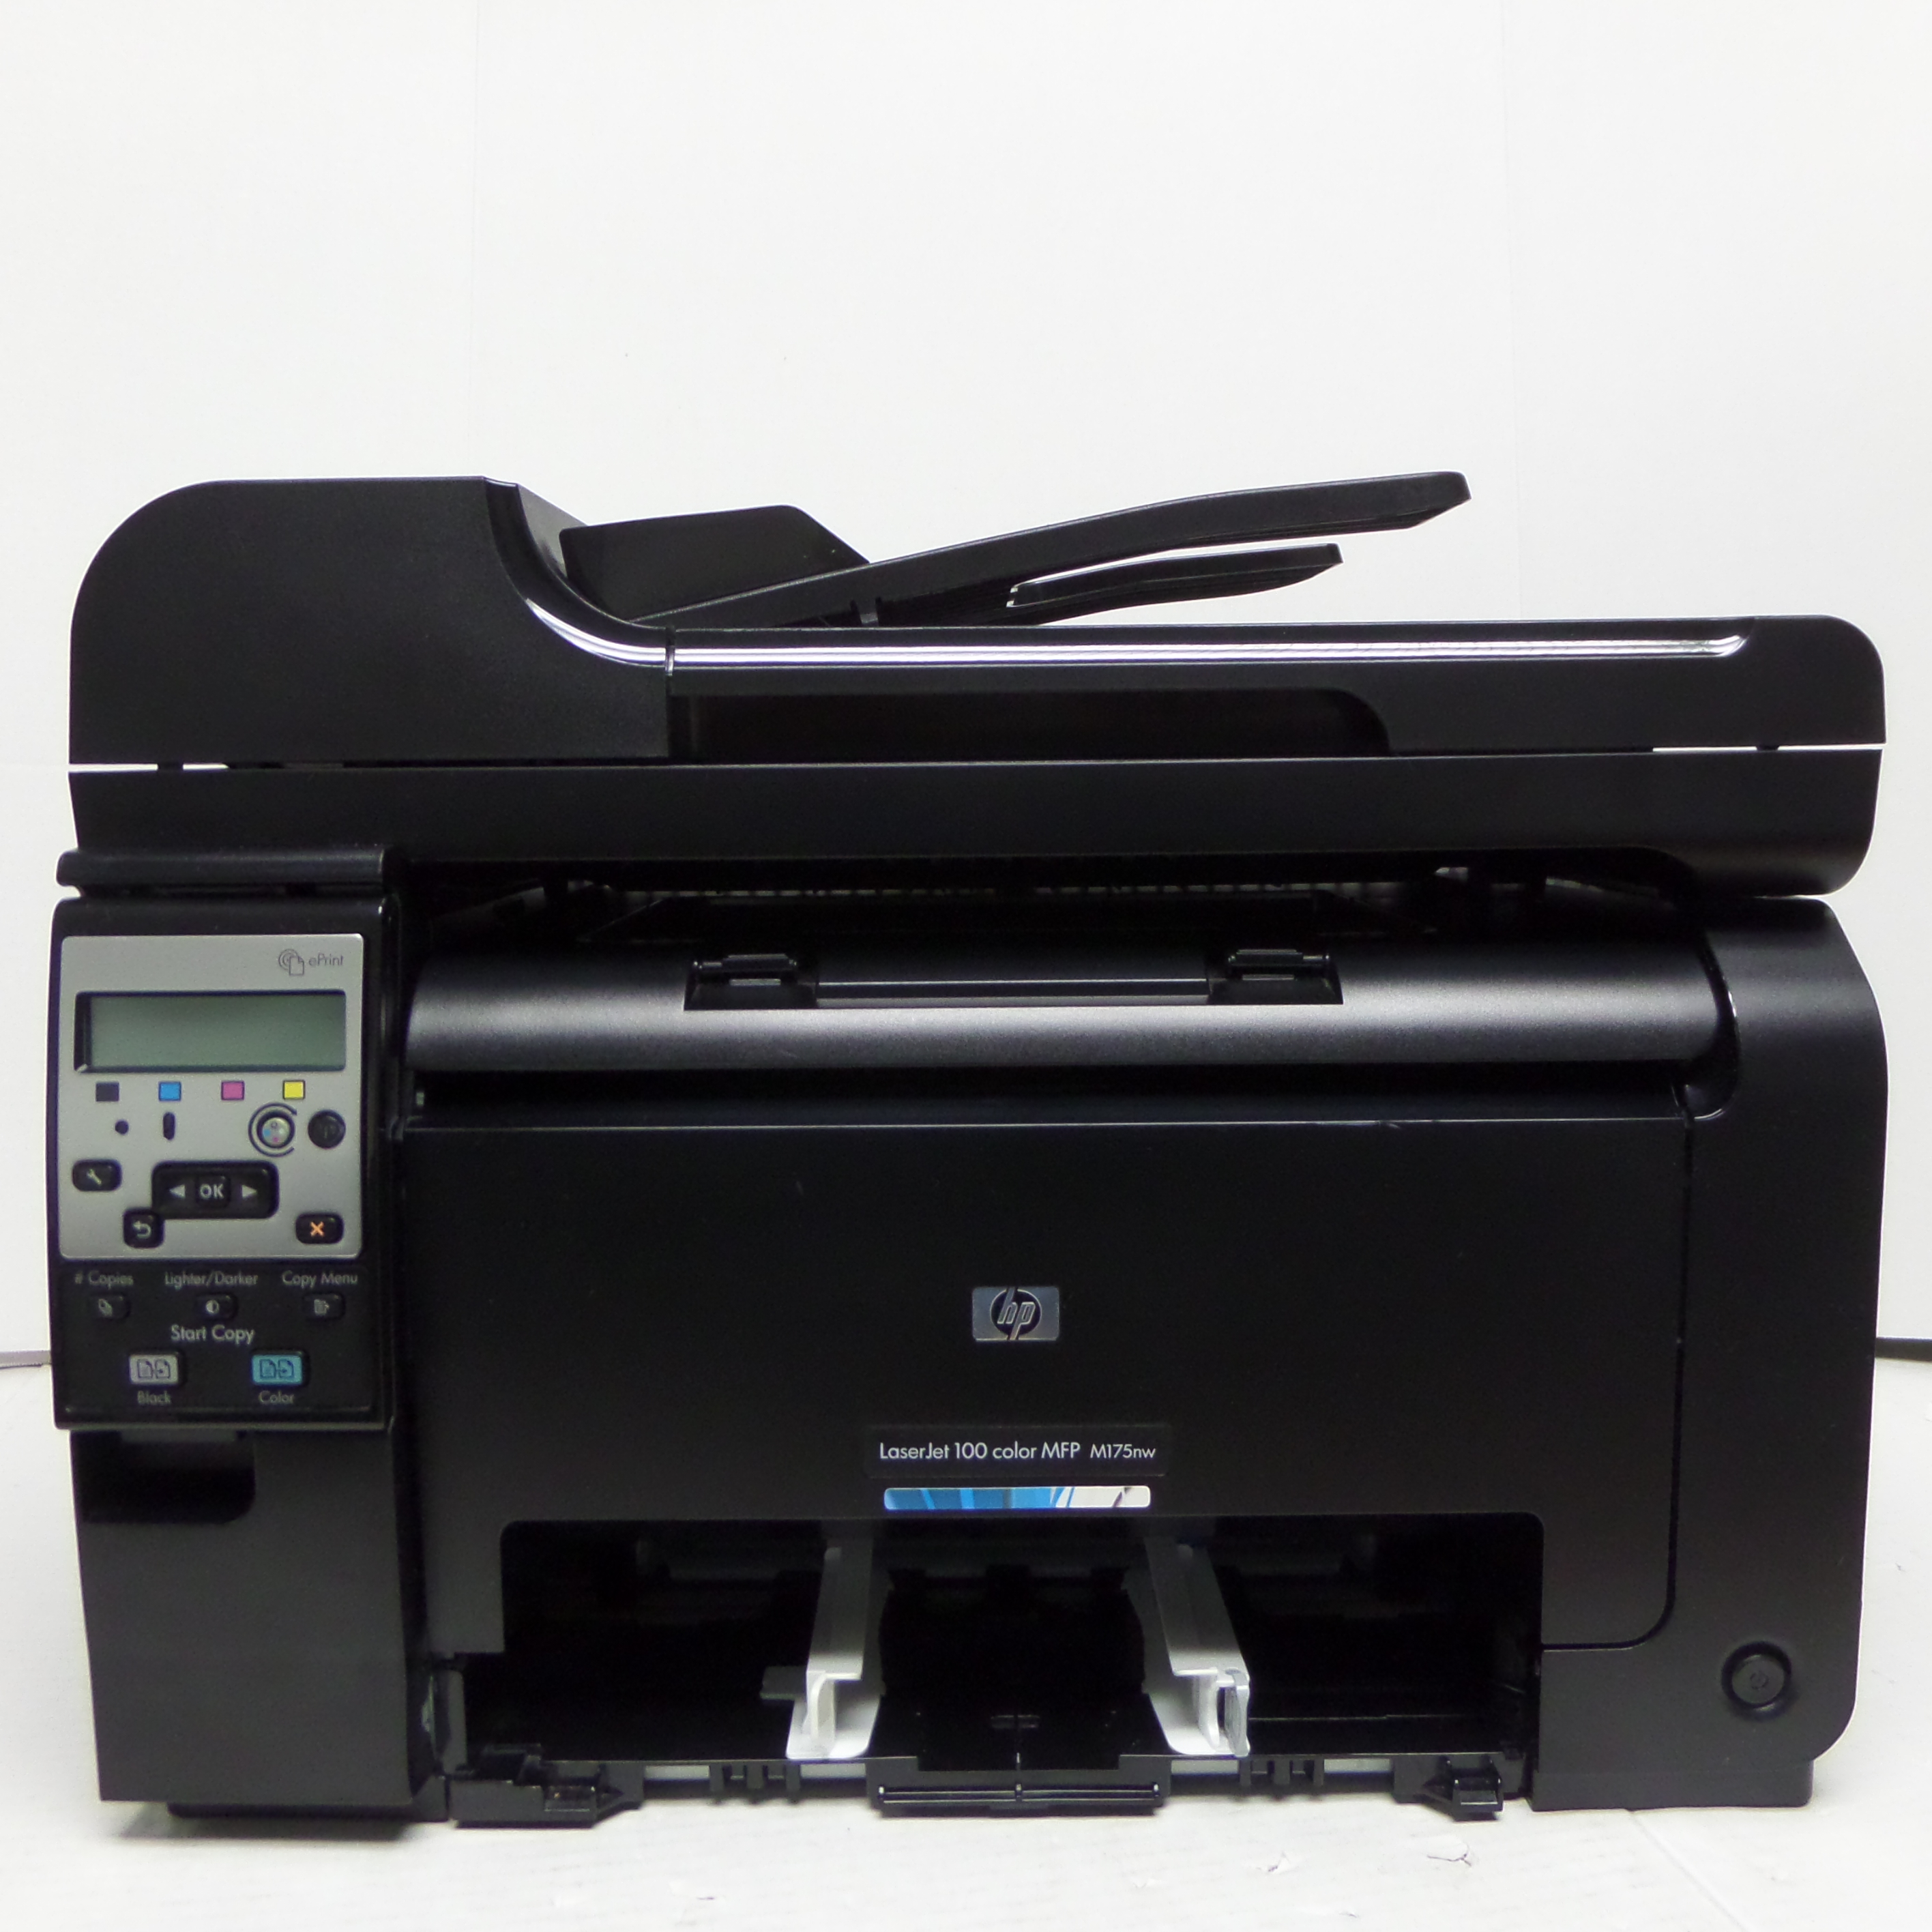 HP LaserJet 100 color All-In-One MFP M175nw Printer Page Count 10514